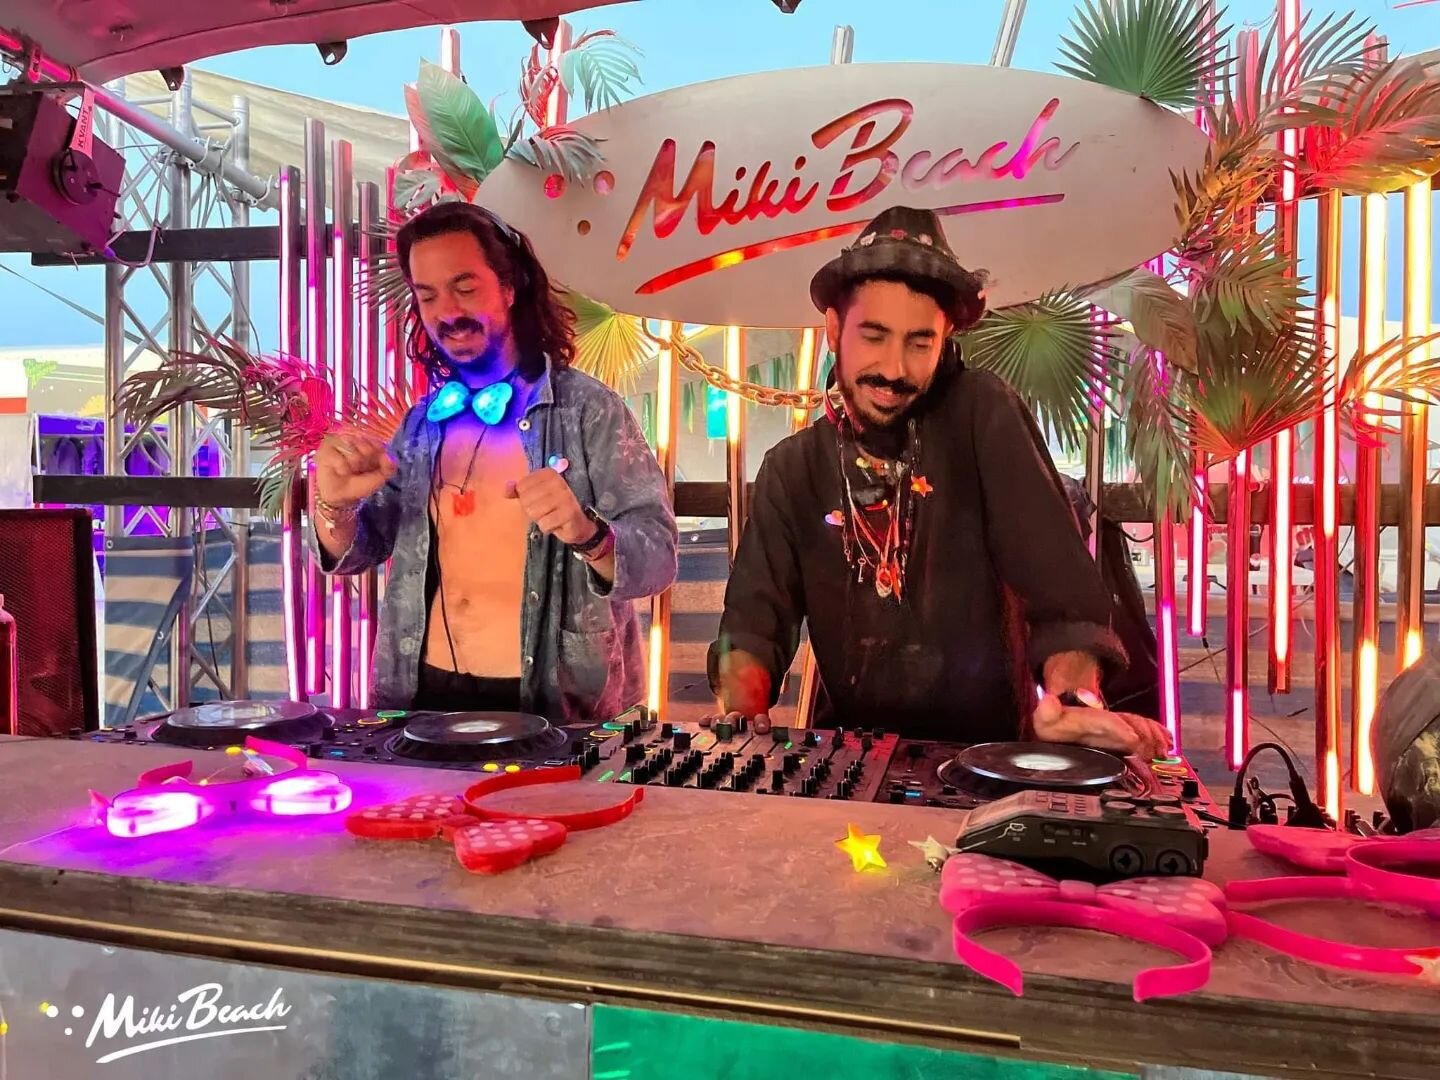 @mikibeachcamp 🔥)*(

Thank you to the entire Miki family who poured their love &amp; hard work into the camp. Big hug to everyone who Tropic Raved with us on 10 &amp; D! We Burned extra hot this year ☀️🌴✨️💃👽

See you soon on the sands of our pris